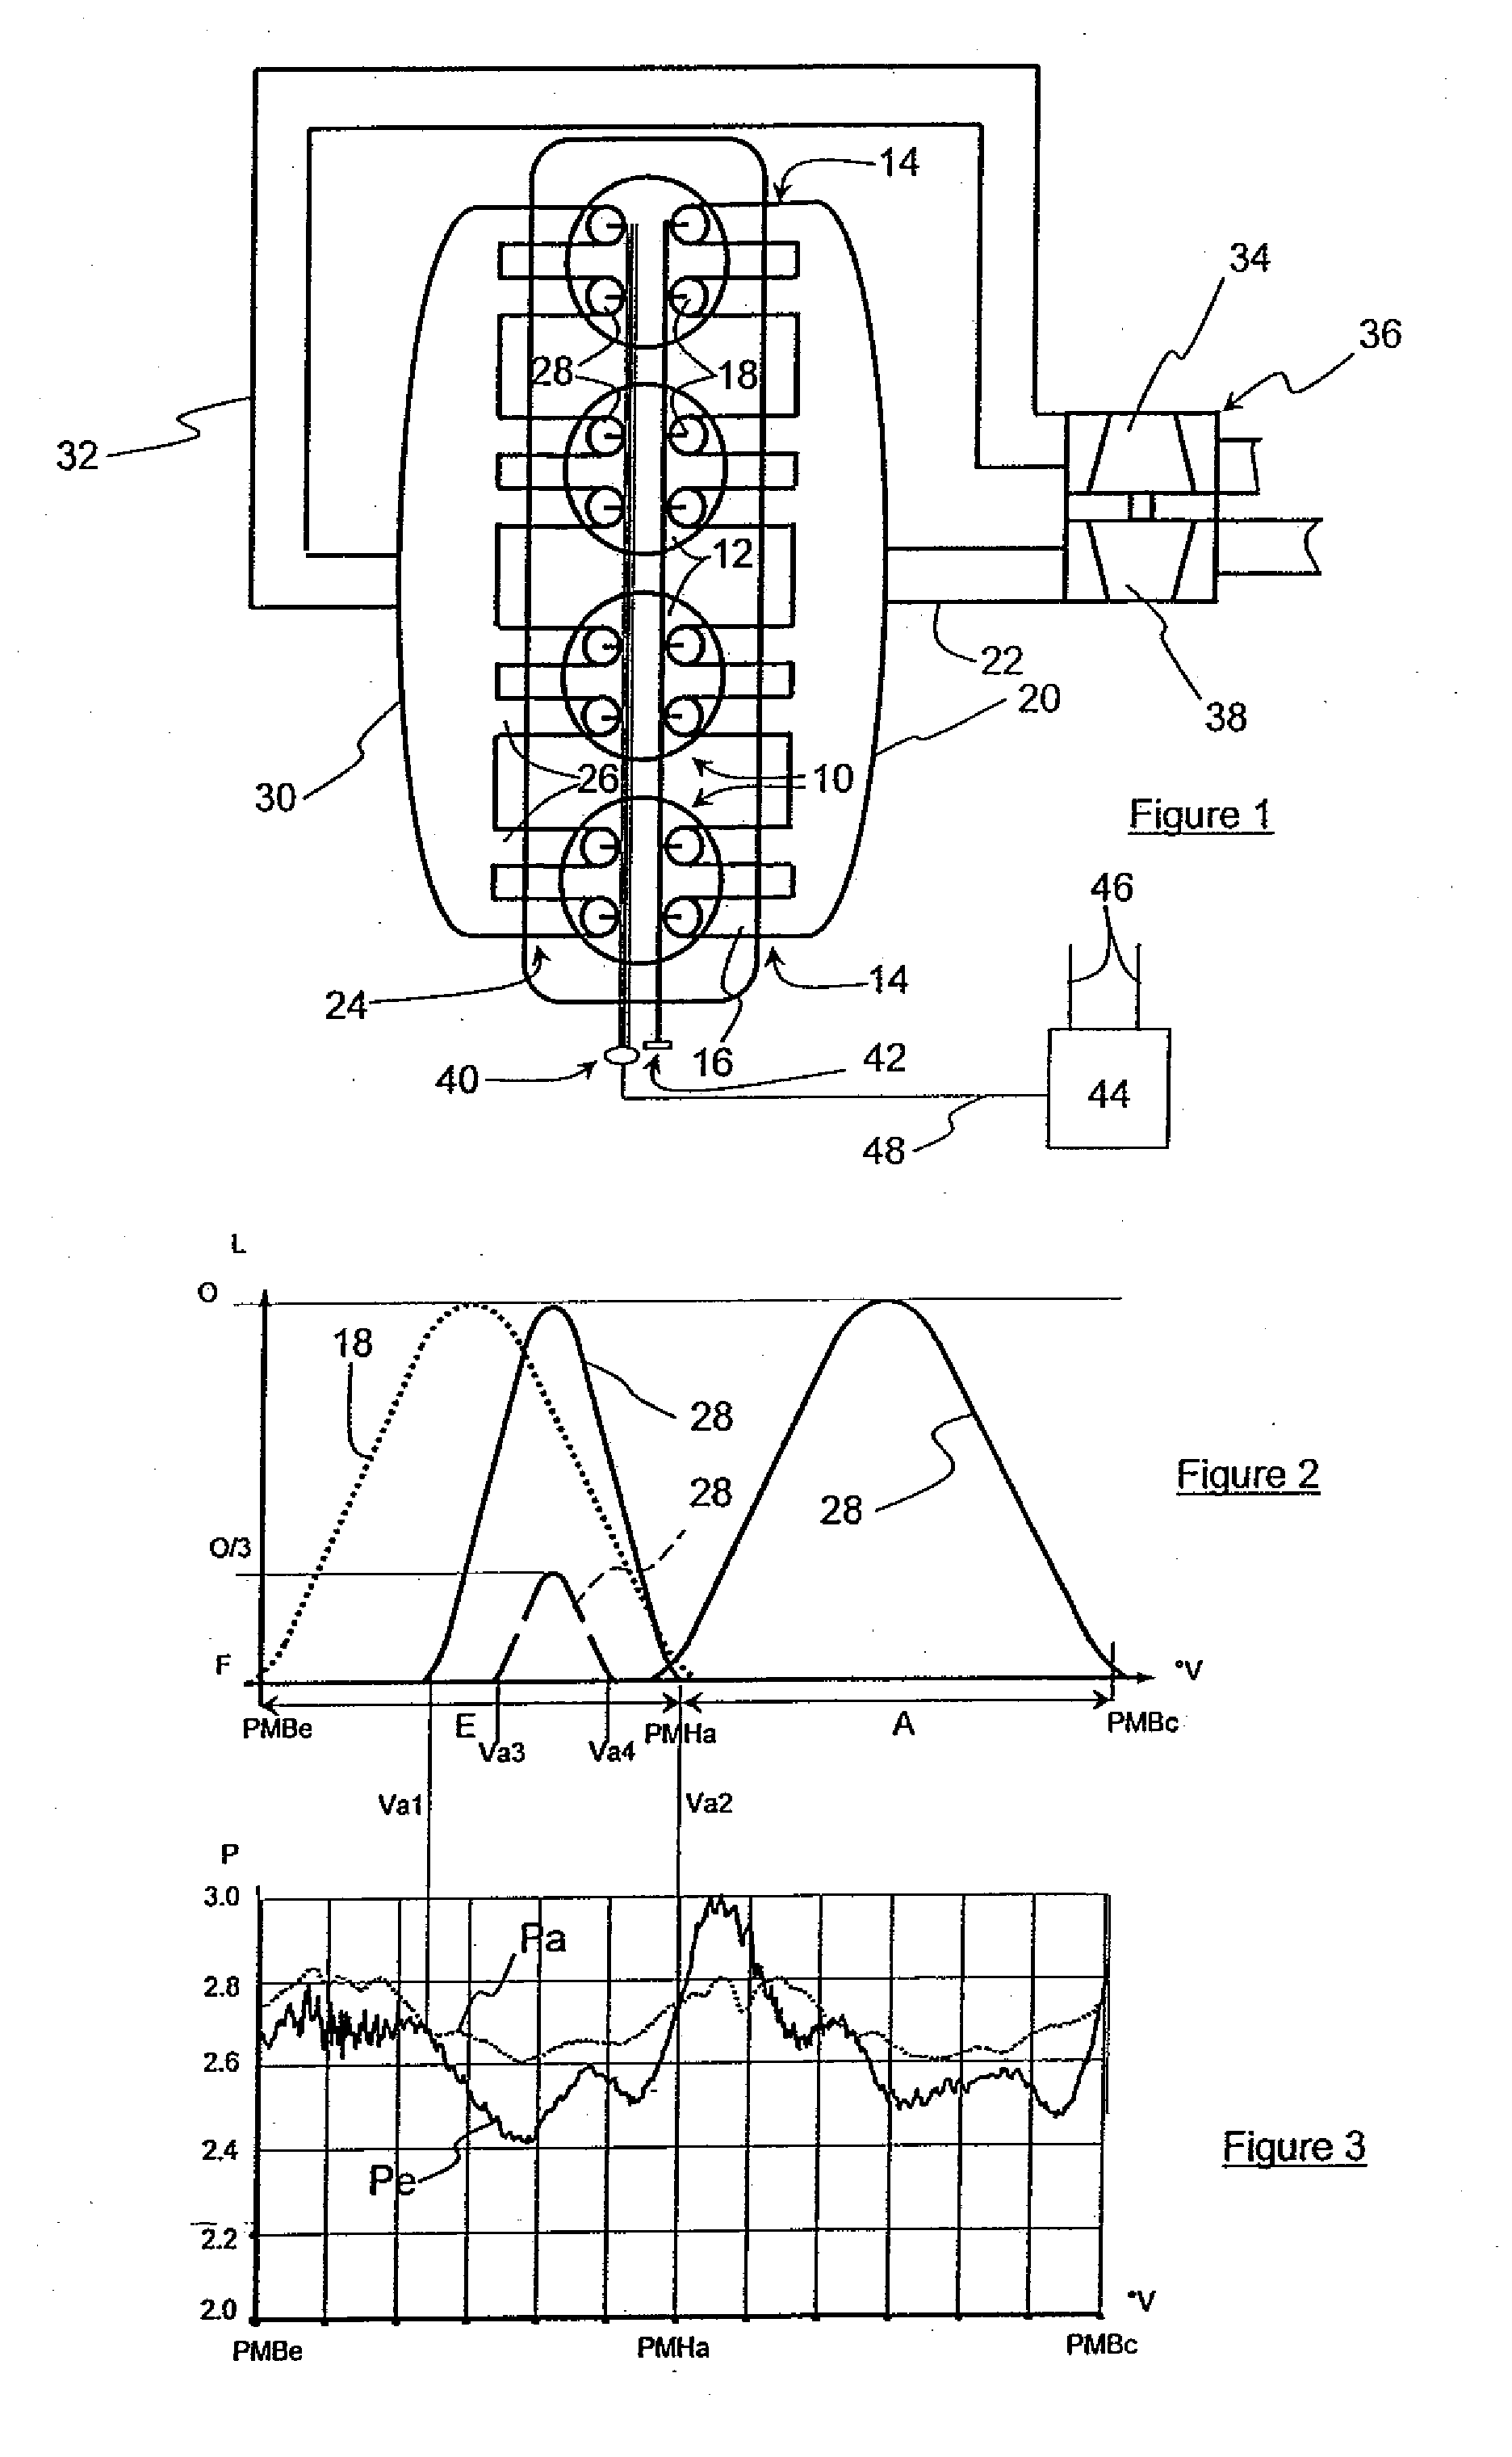 Residual burnt gas scavenging method with double intake valve lift in a direct-injection supercharged internal-combusion engine, notably of diesel type